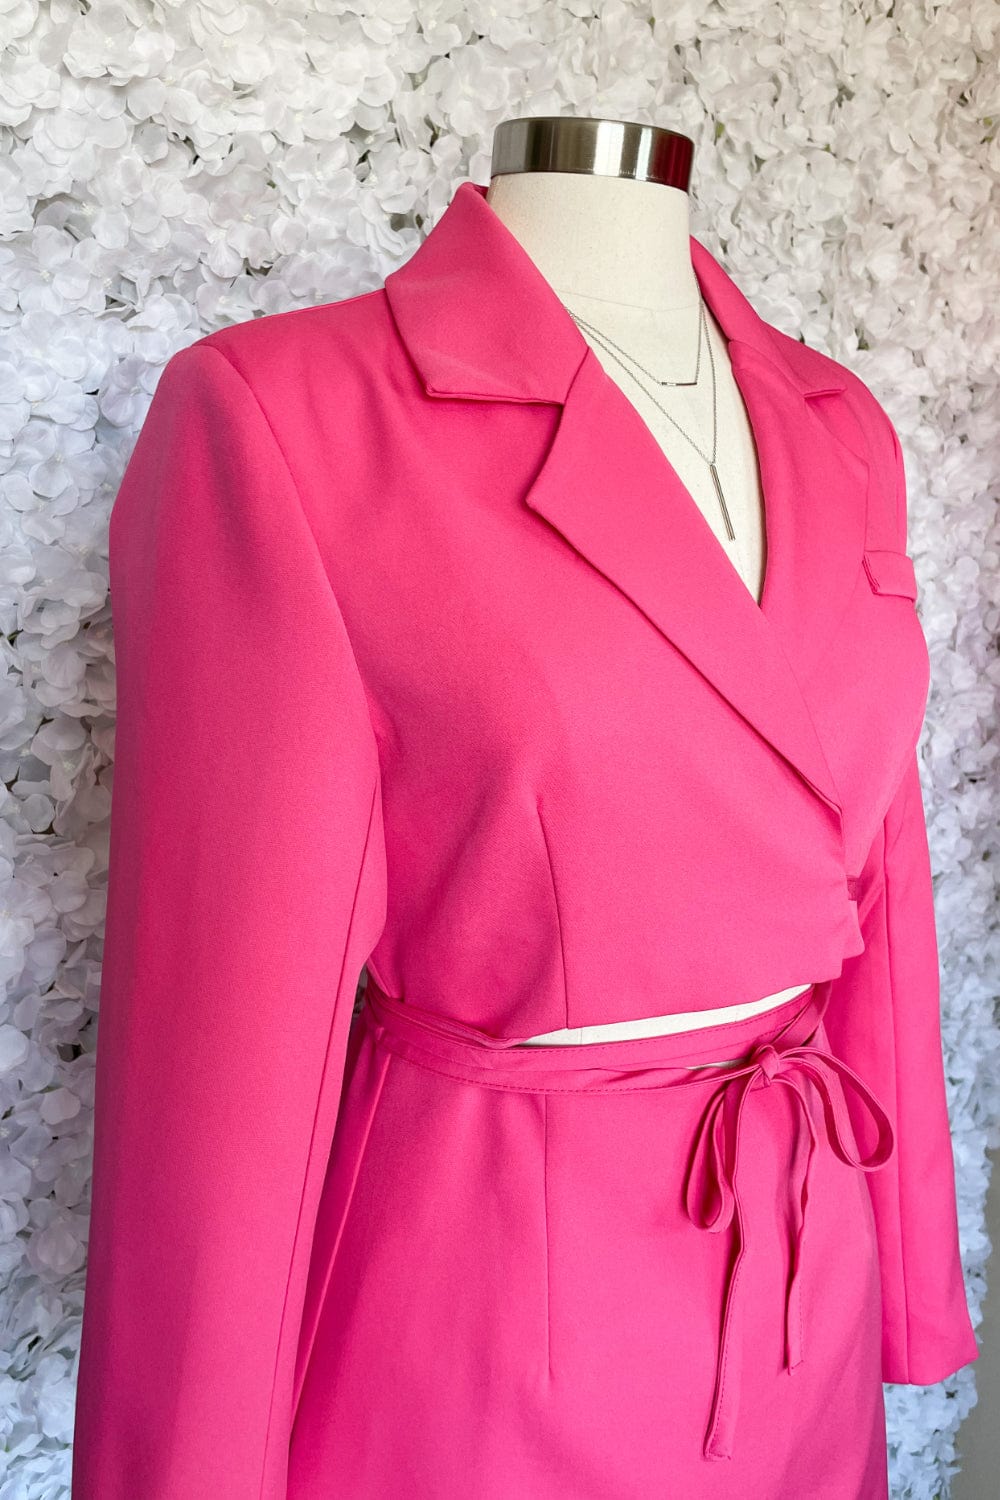 Sapphire Hot Pink Blazer Cut Out Dress - Dresses - Blooming Daily